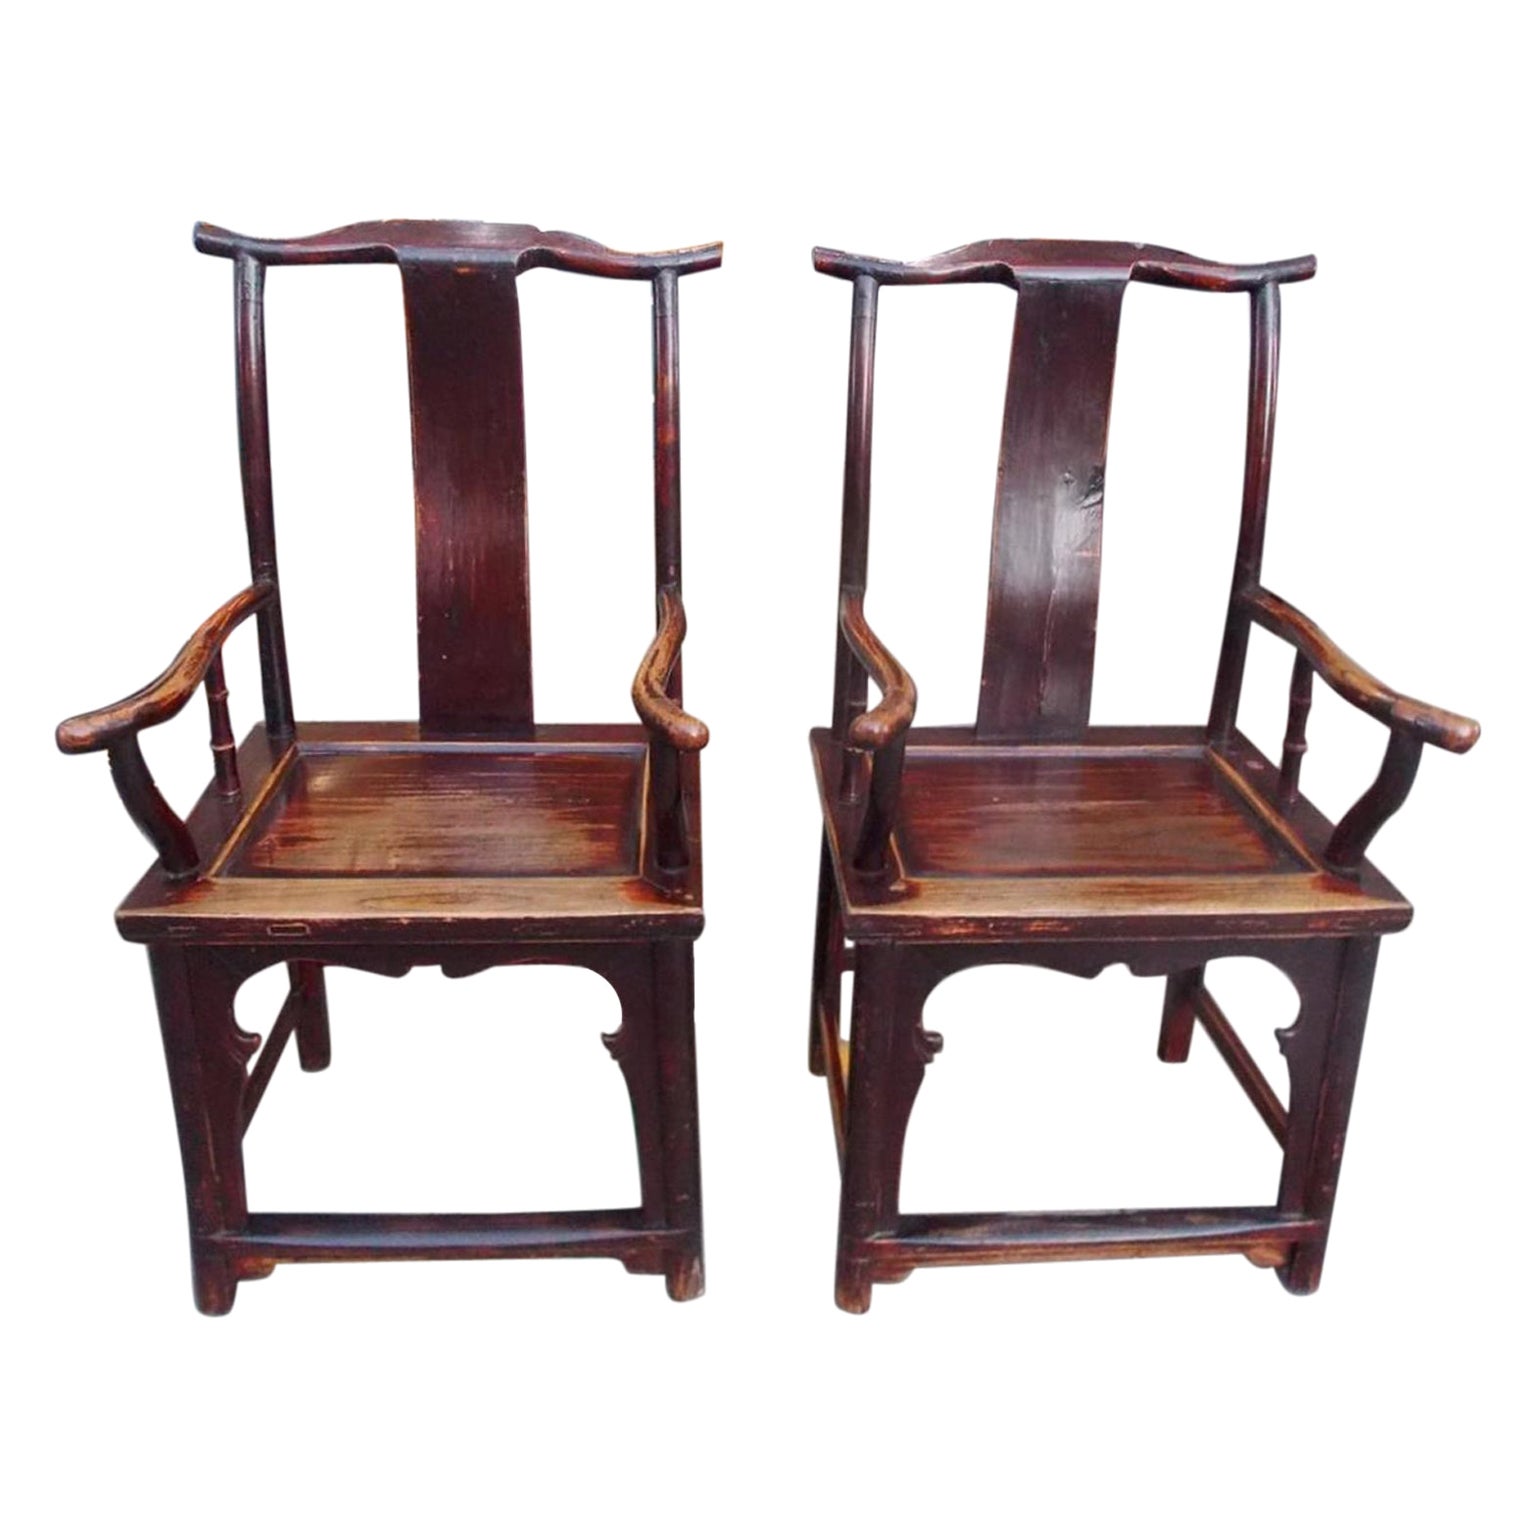 Pair of Chinese Chippendale Qing Dynasty Red Lacquered King Wood Arm Chairs 1840 For Sale